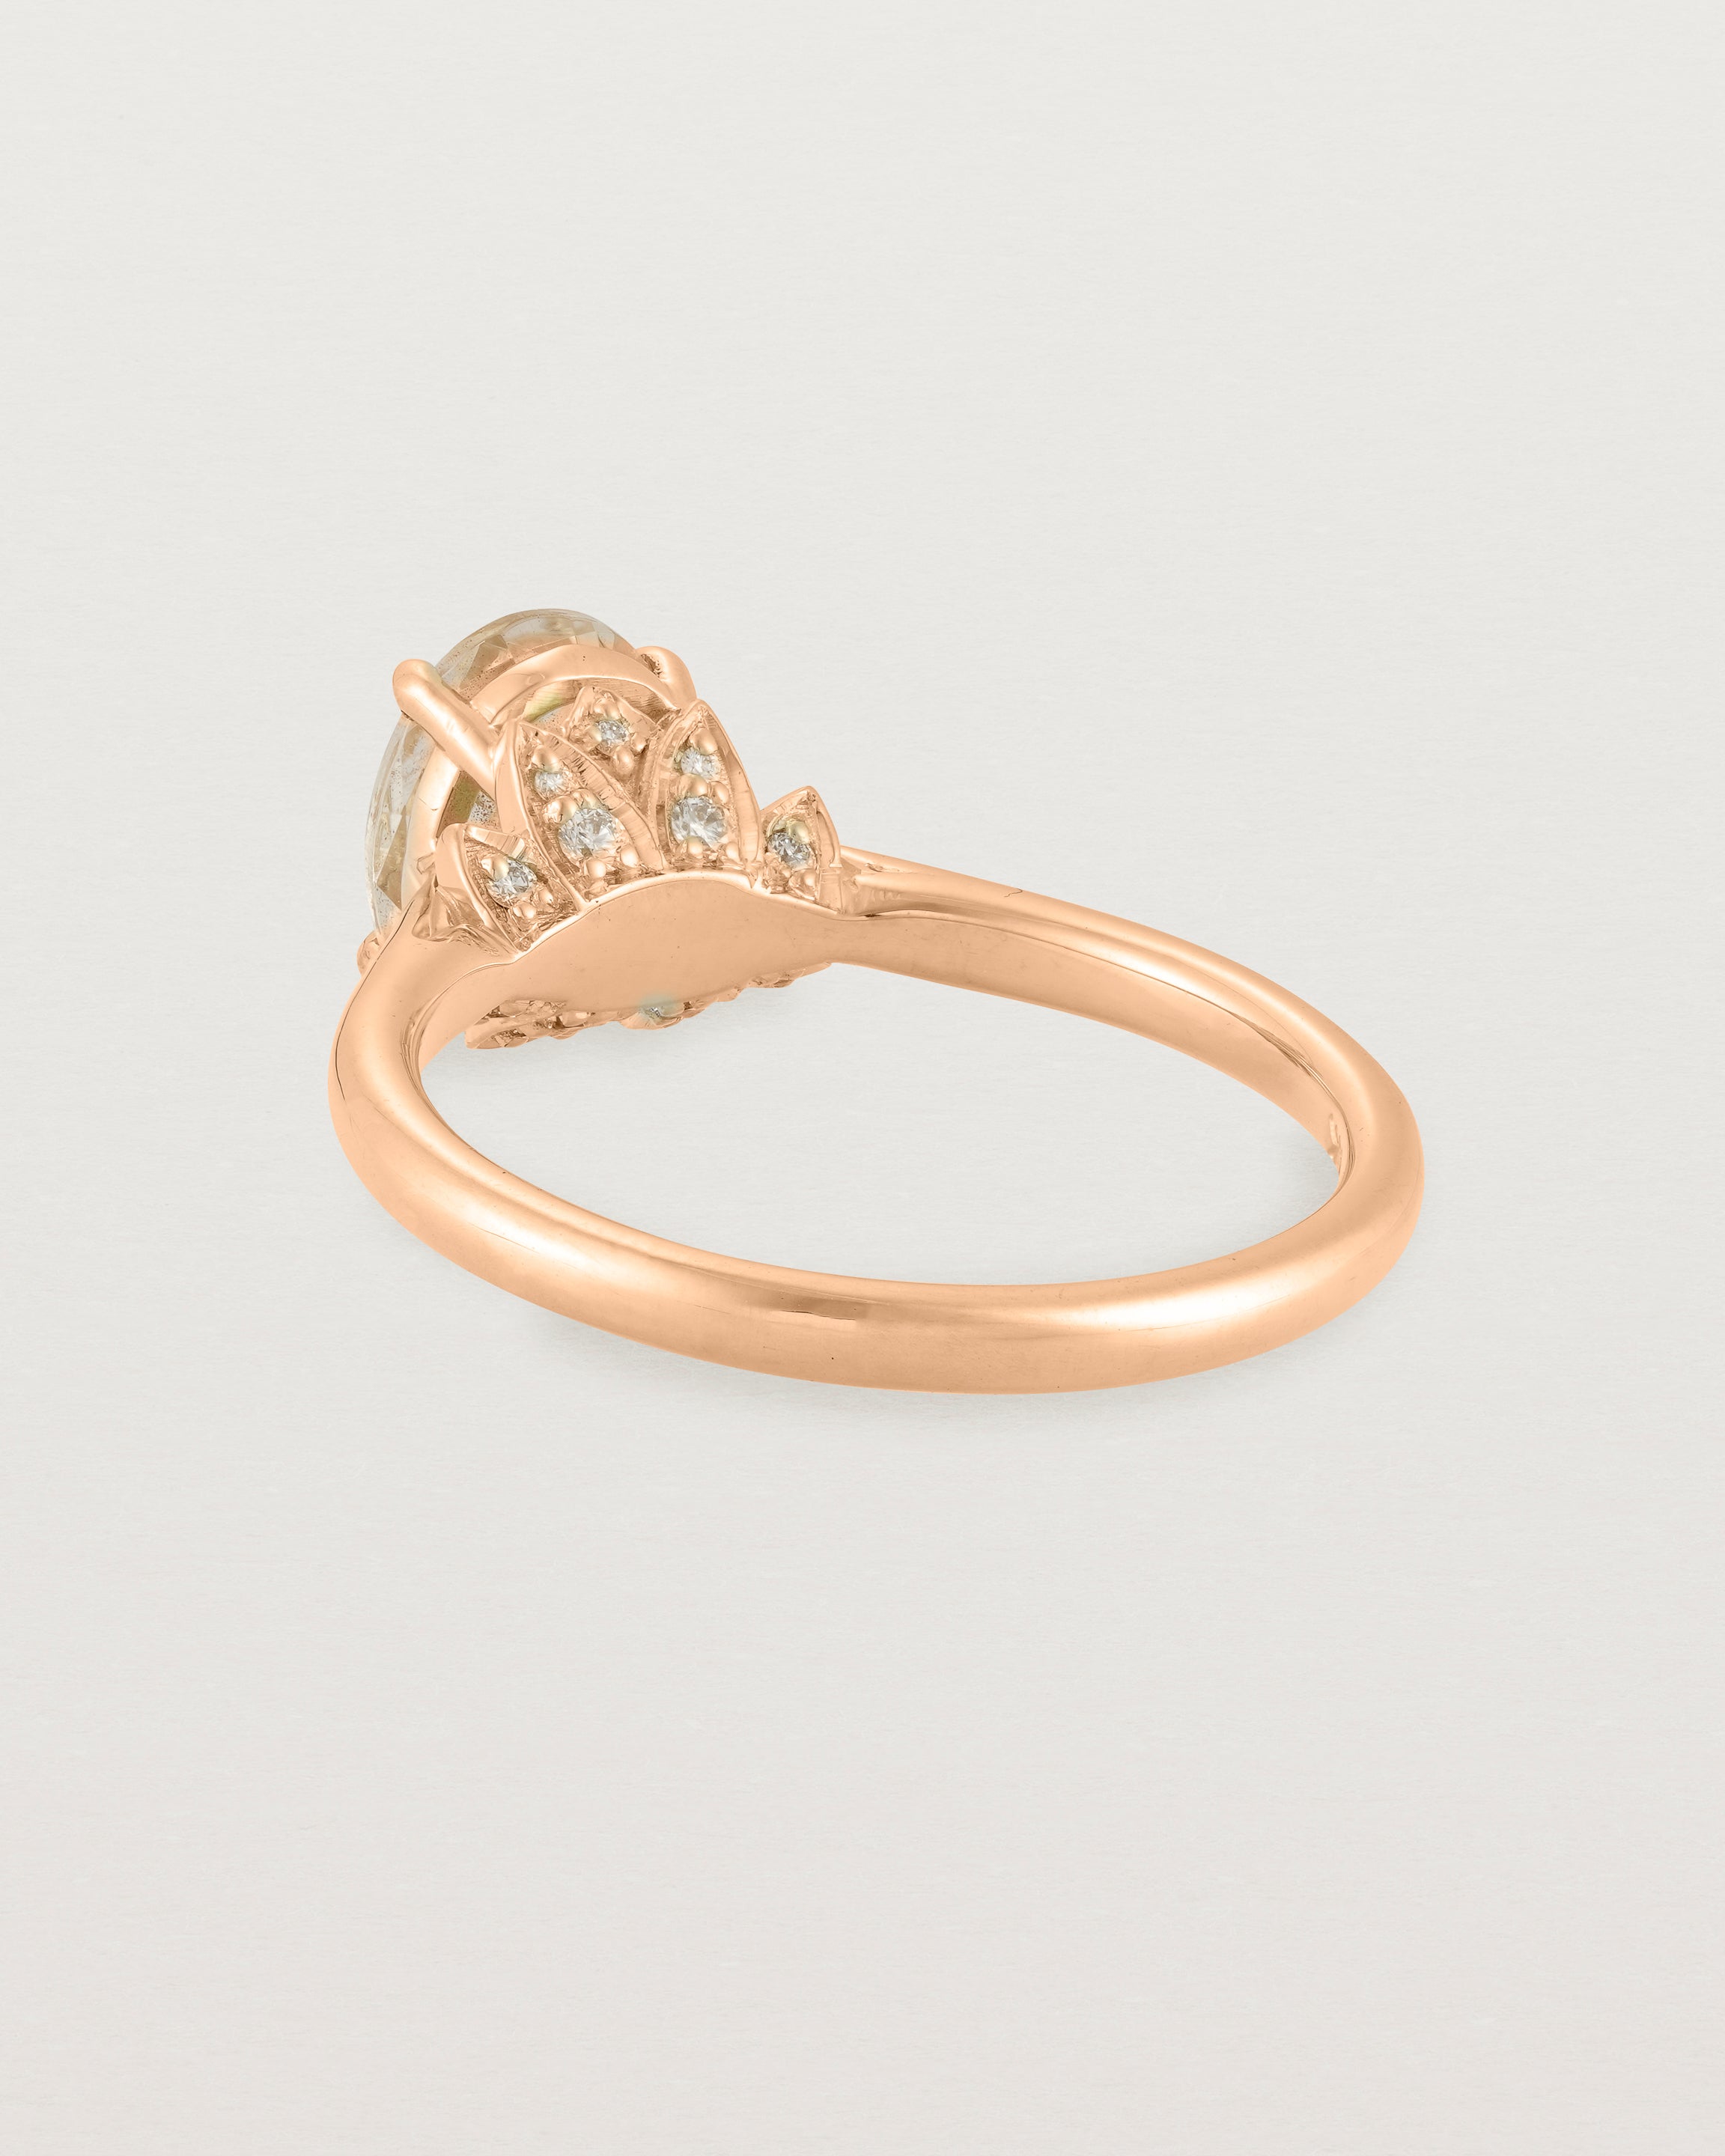 Back view of the Kalina Oval Solitaire | Savannah Sunstone | Rose Gold.